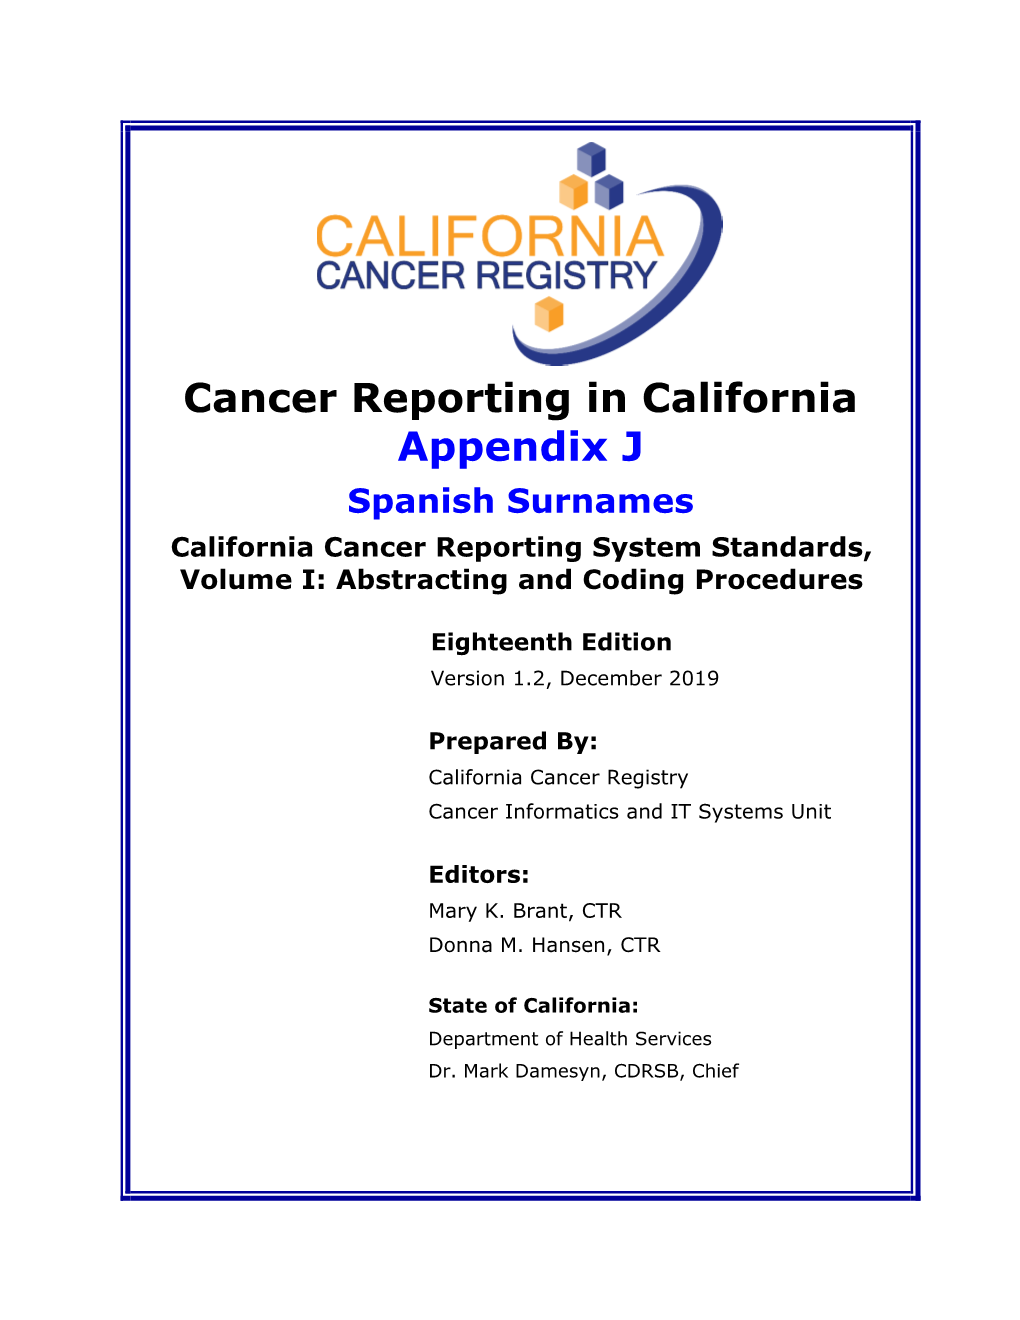 Appendix J Spanish Surnames California Cancer Reporting System Standards, Volume I: Abstracting and Coding Procedures